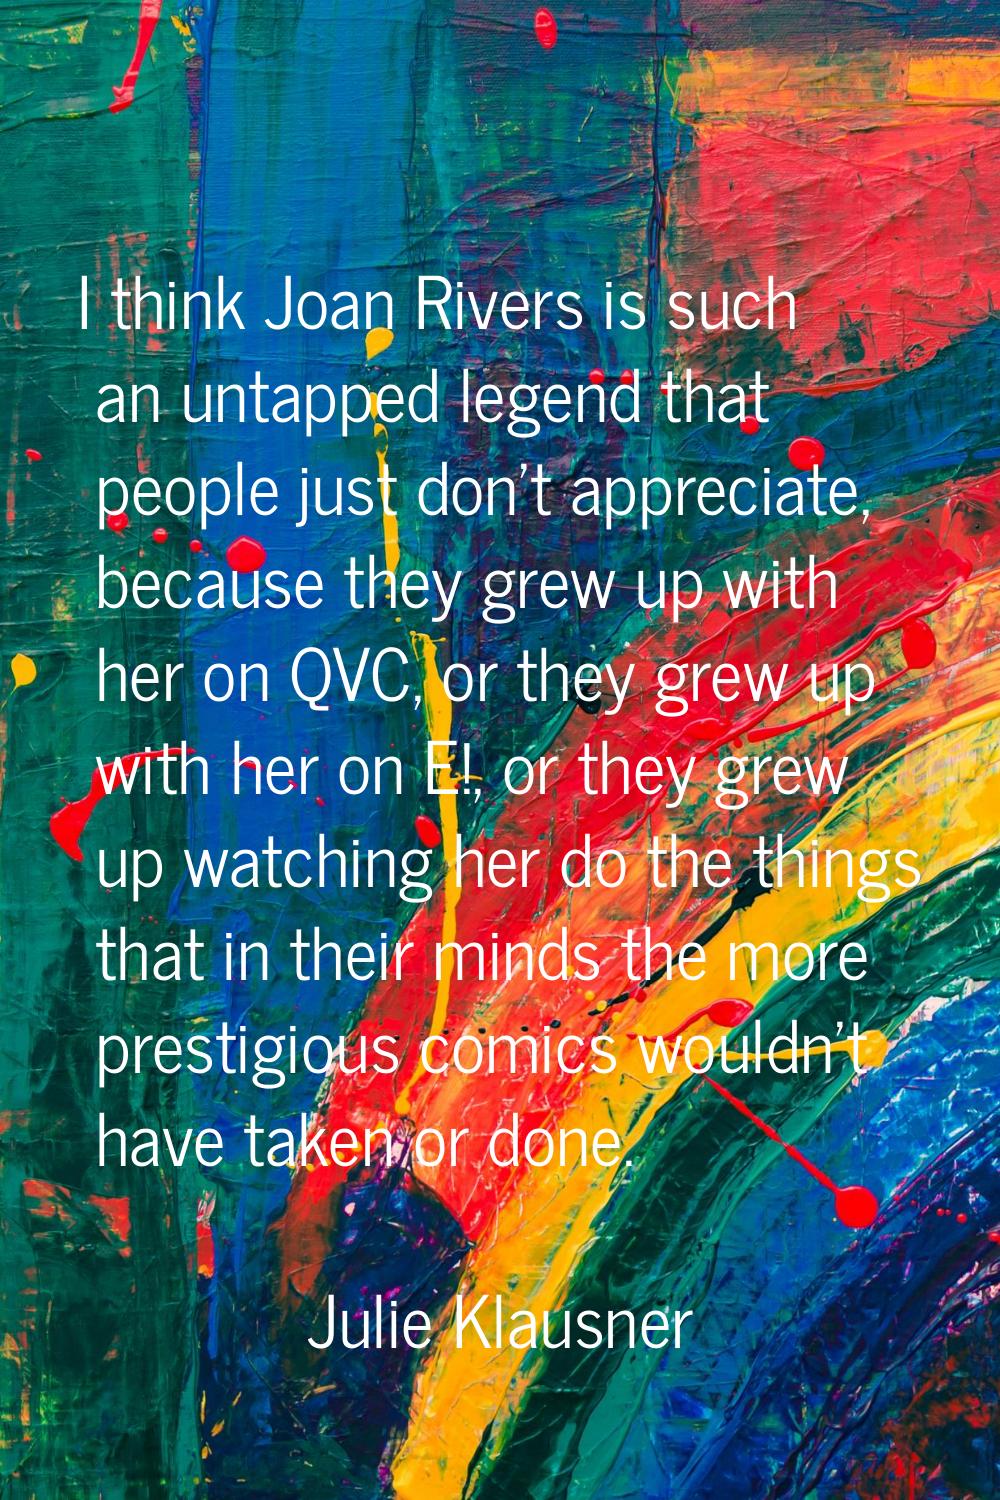 I think Joan Rivers is such an untapped legend that people just don't appreciate, because they grew